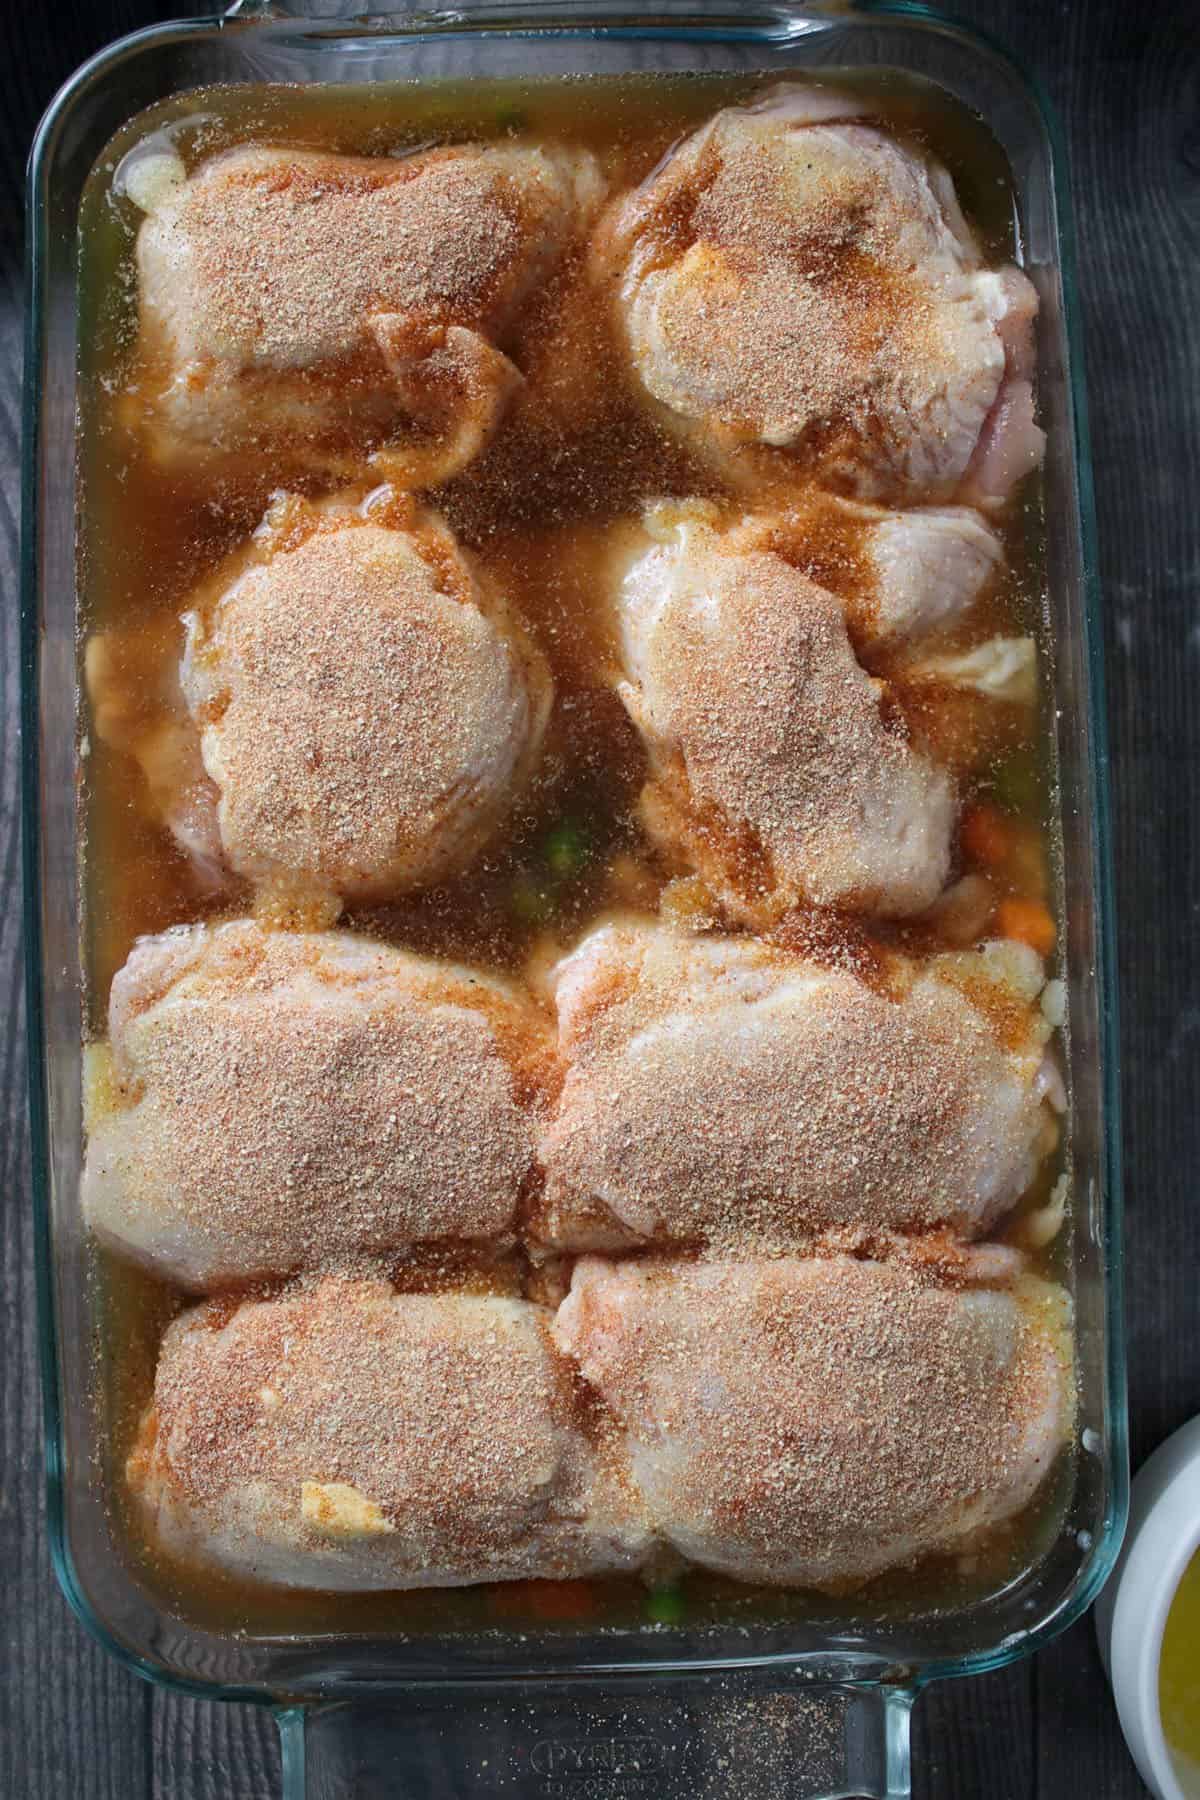 The uncooked chicken casserole, ready for the oven.